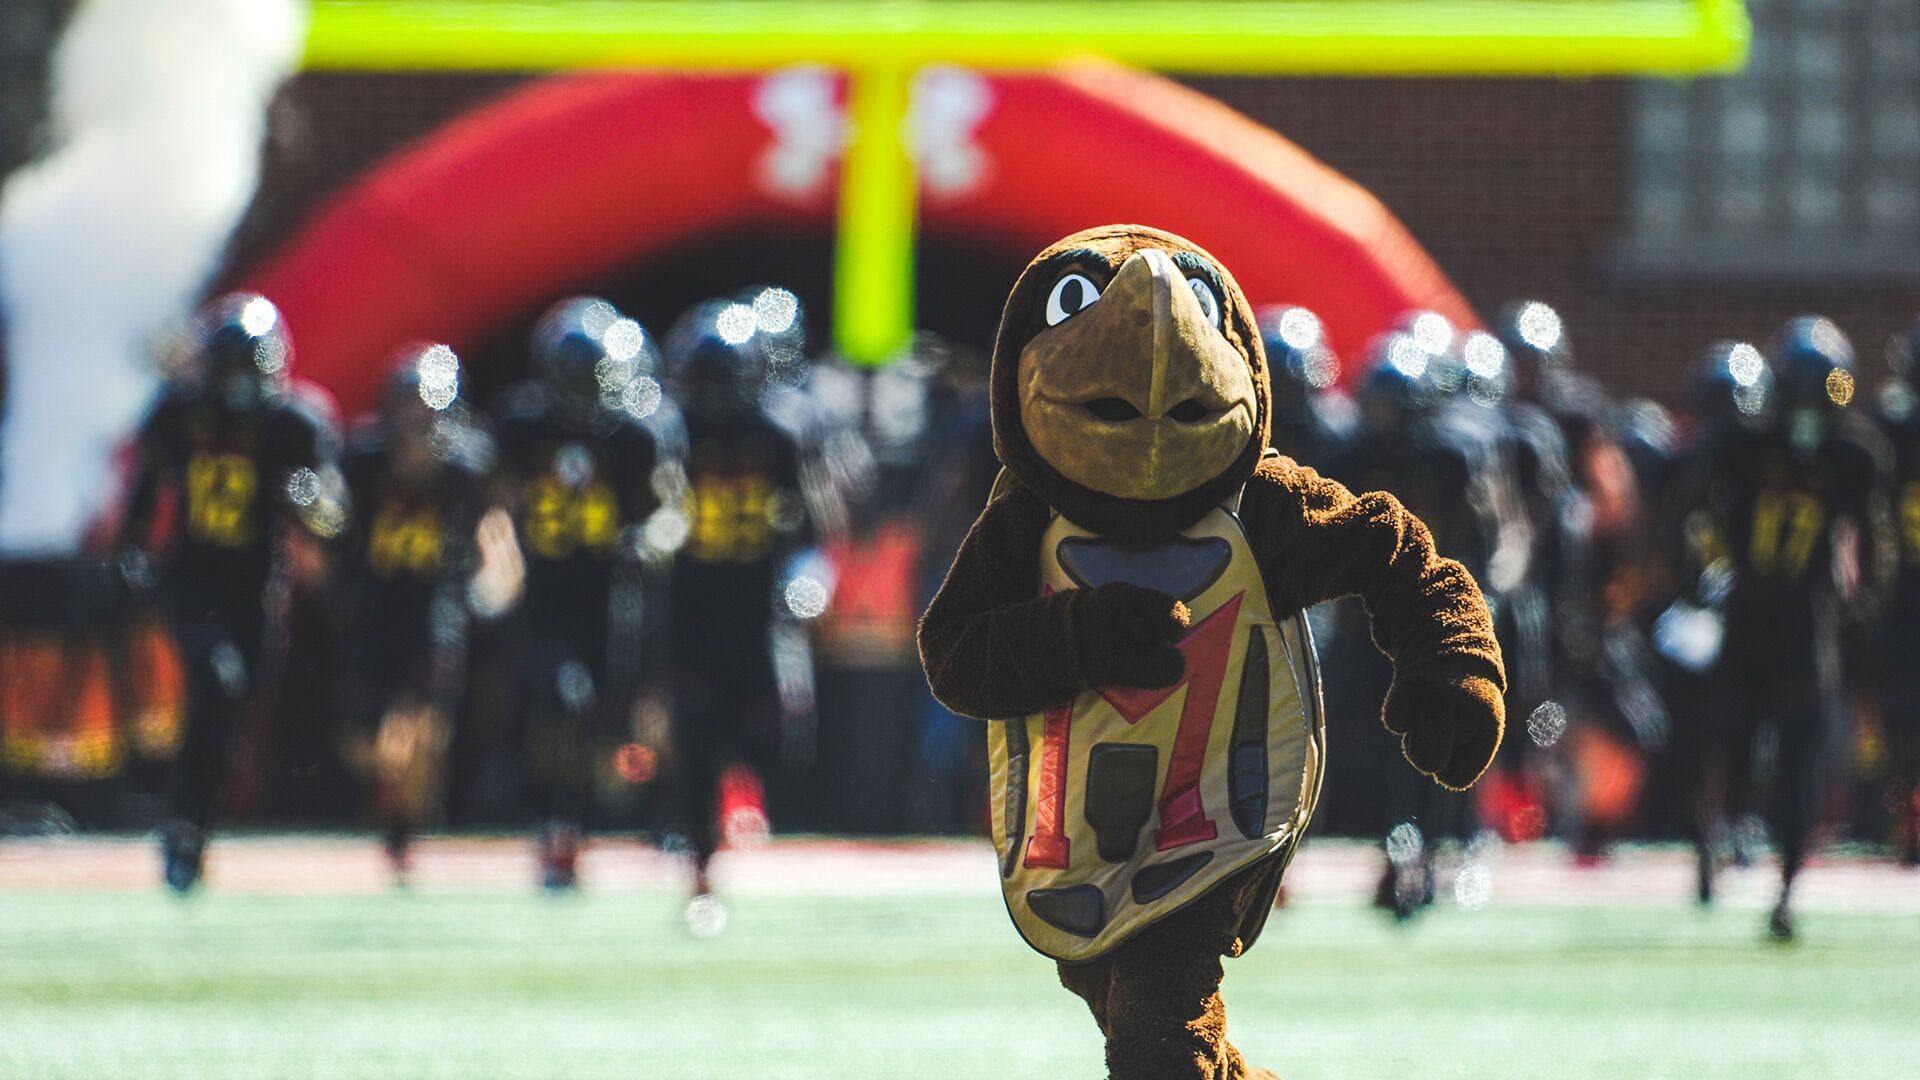 Testudo running out of the tunnel for the football game.